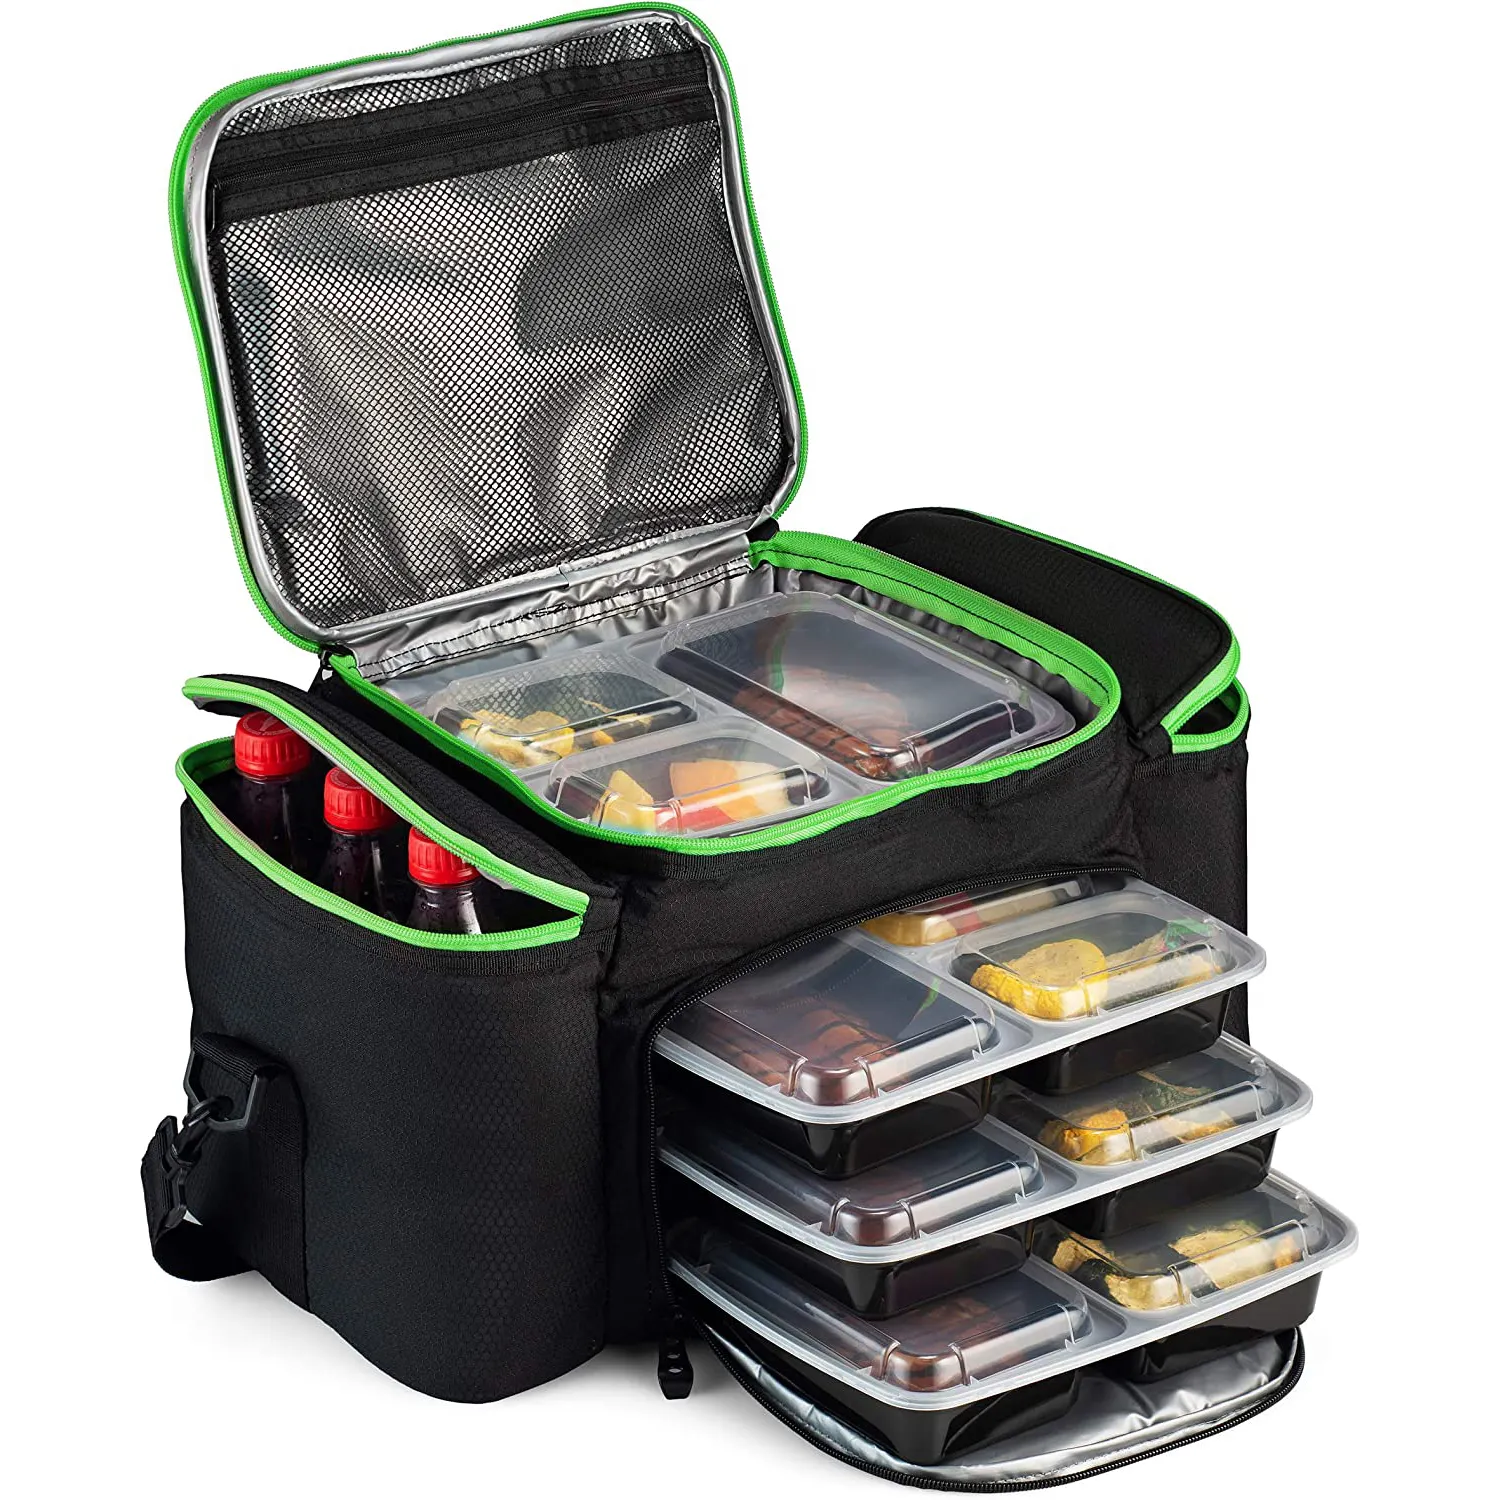 Portable Insulated Lunch Meals Bag Food Cooler Container For Hot or Cold Fitness 6 Meal Prep Bag